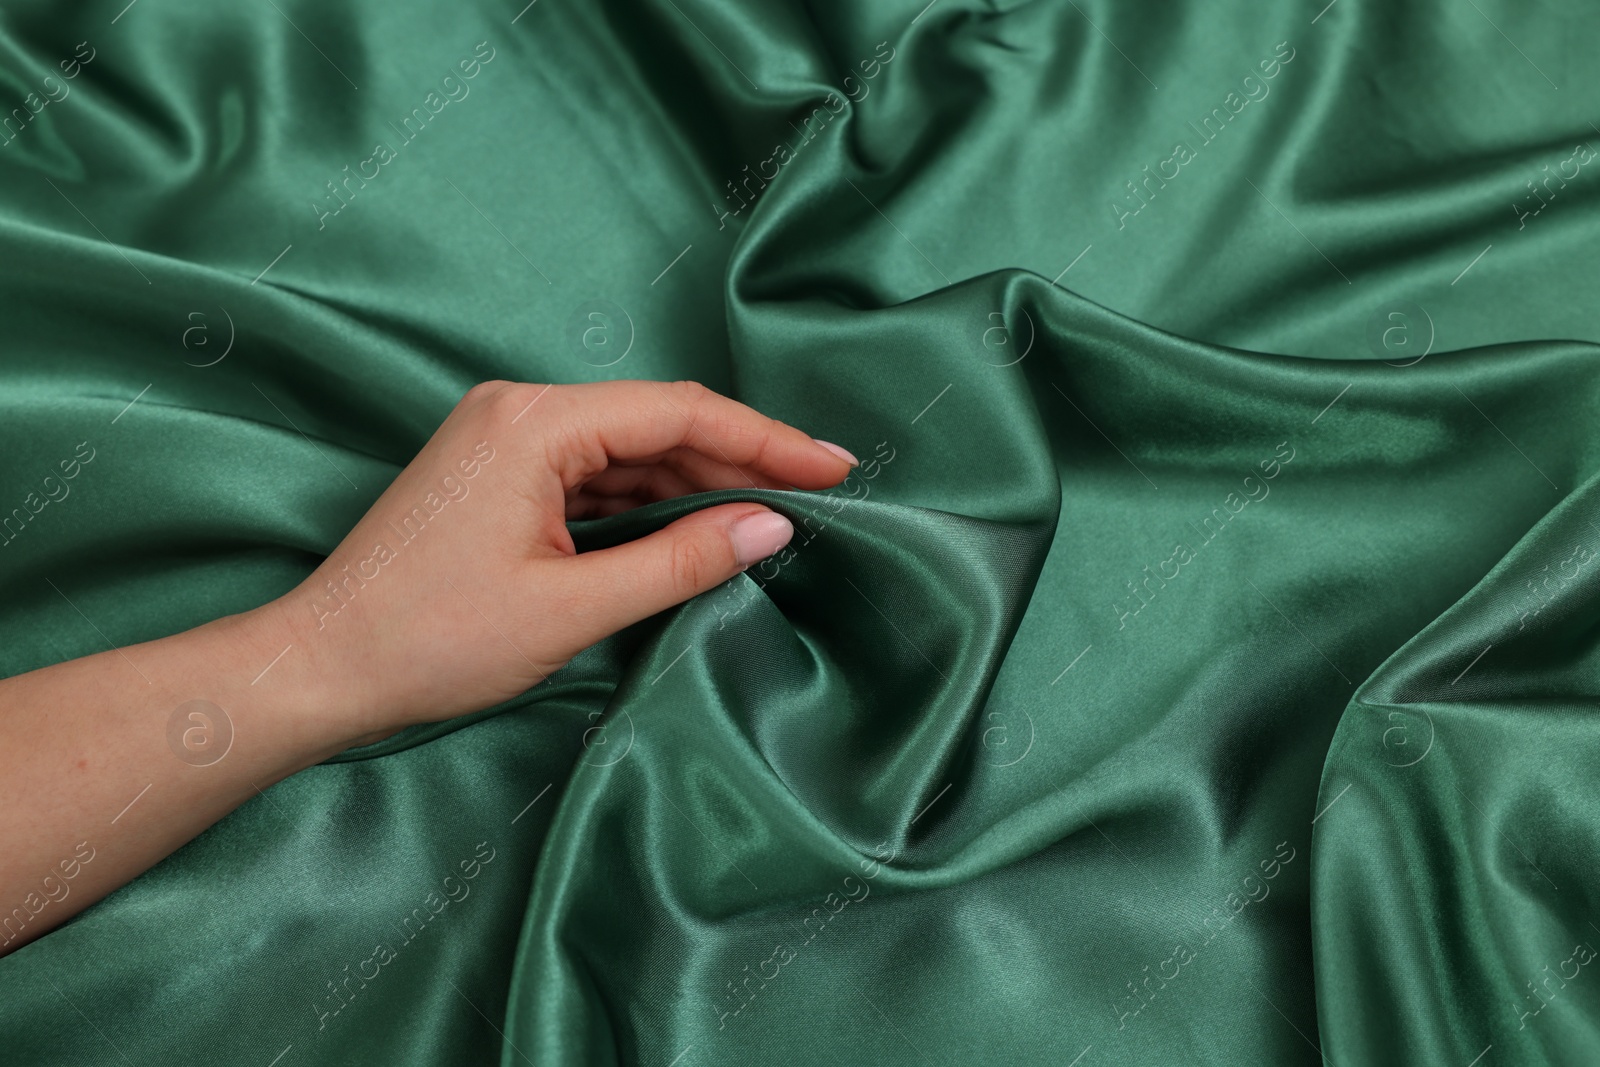 Photo of Woman touching smooth silky fabric, closeup view